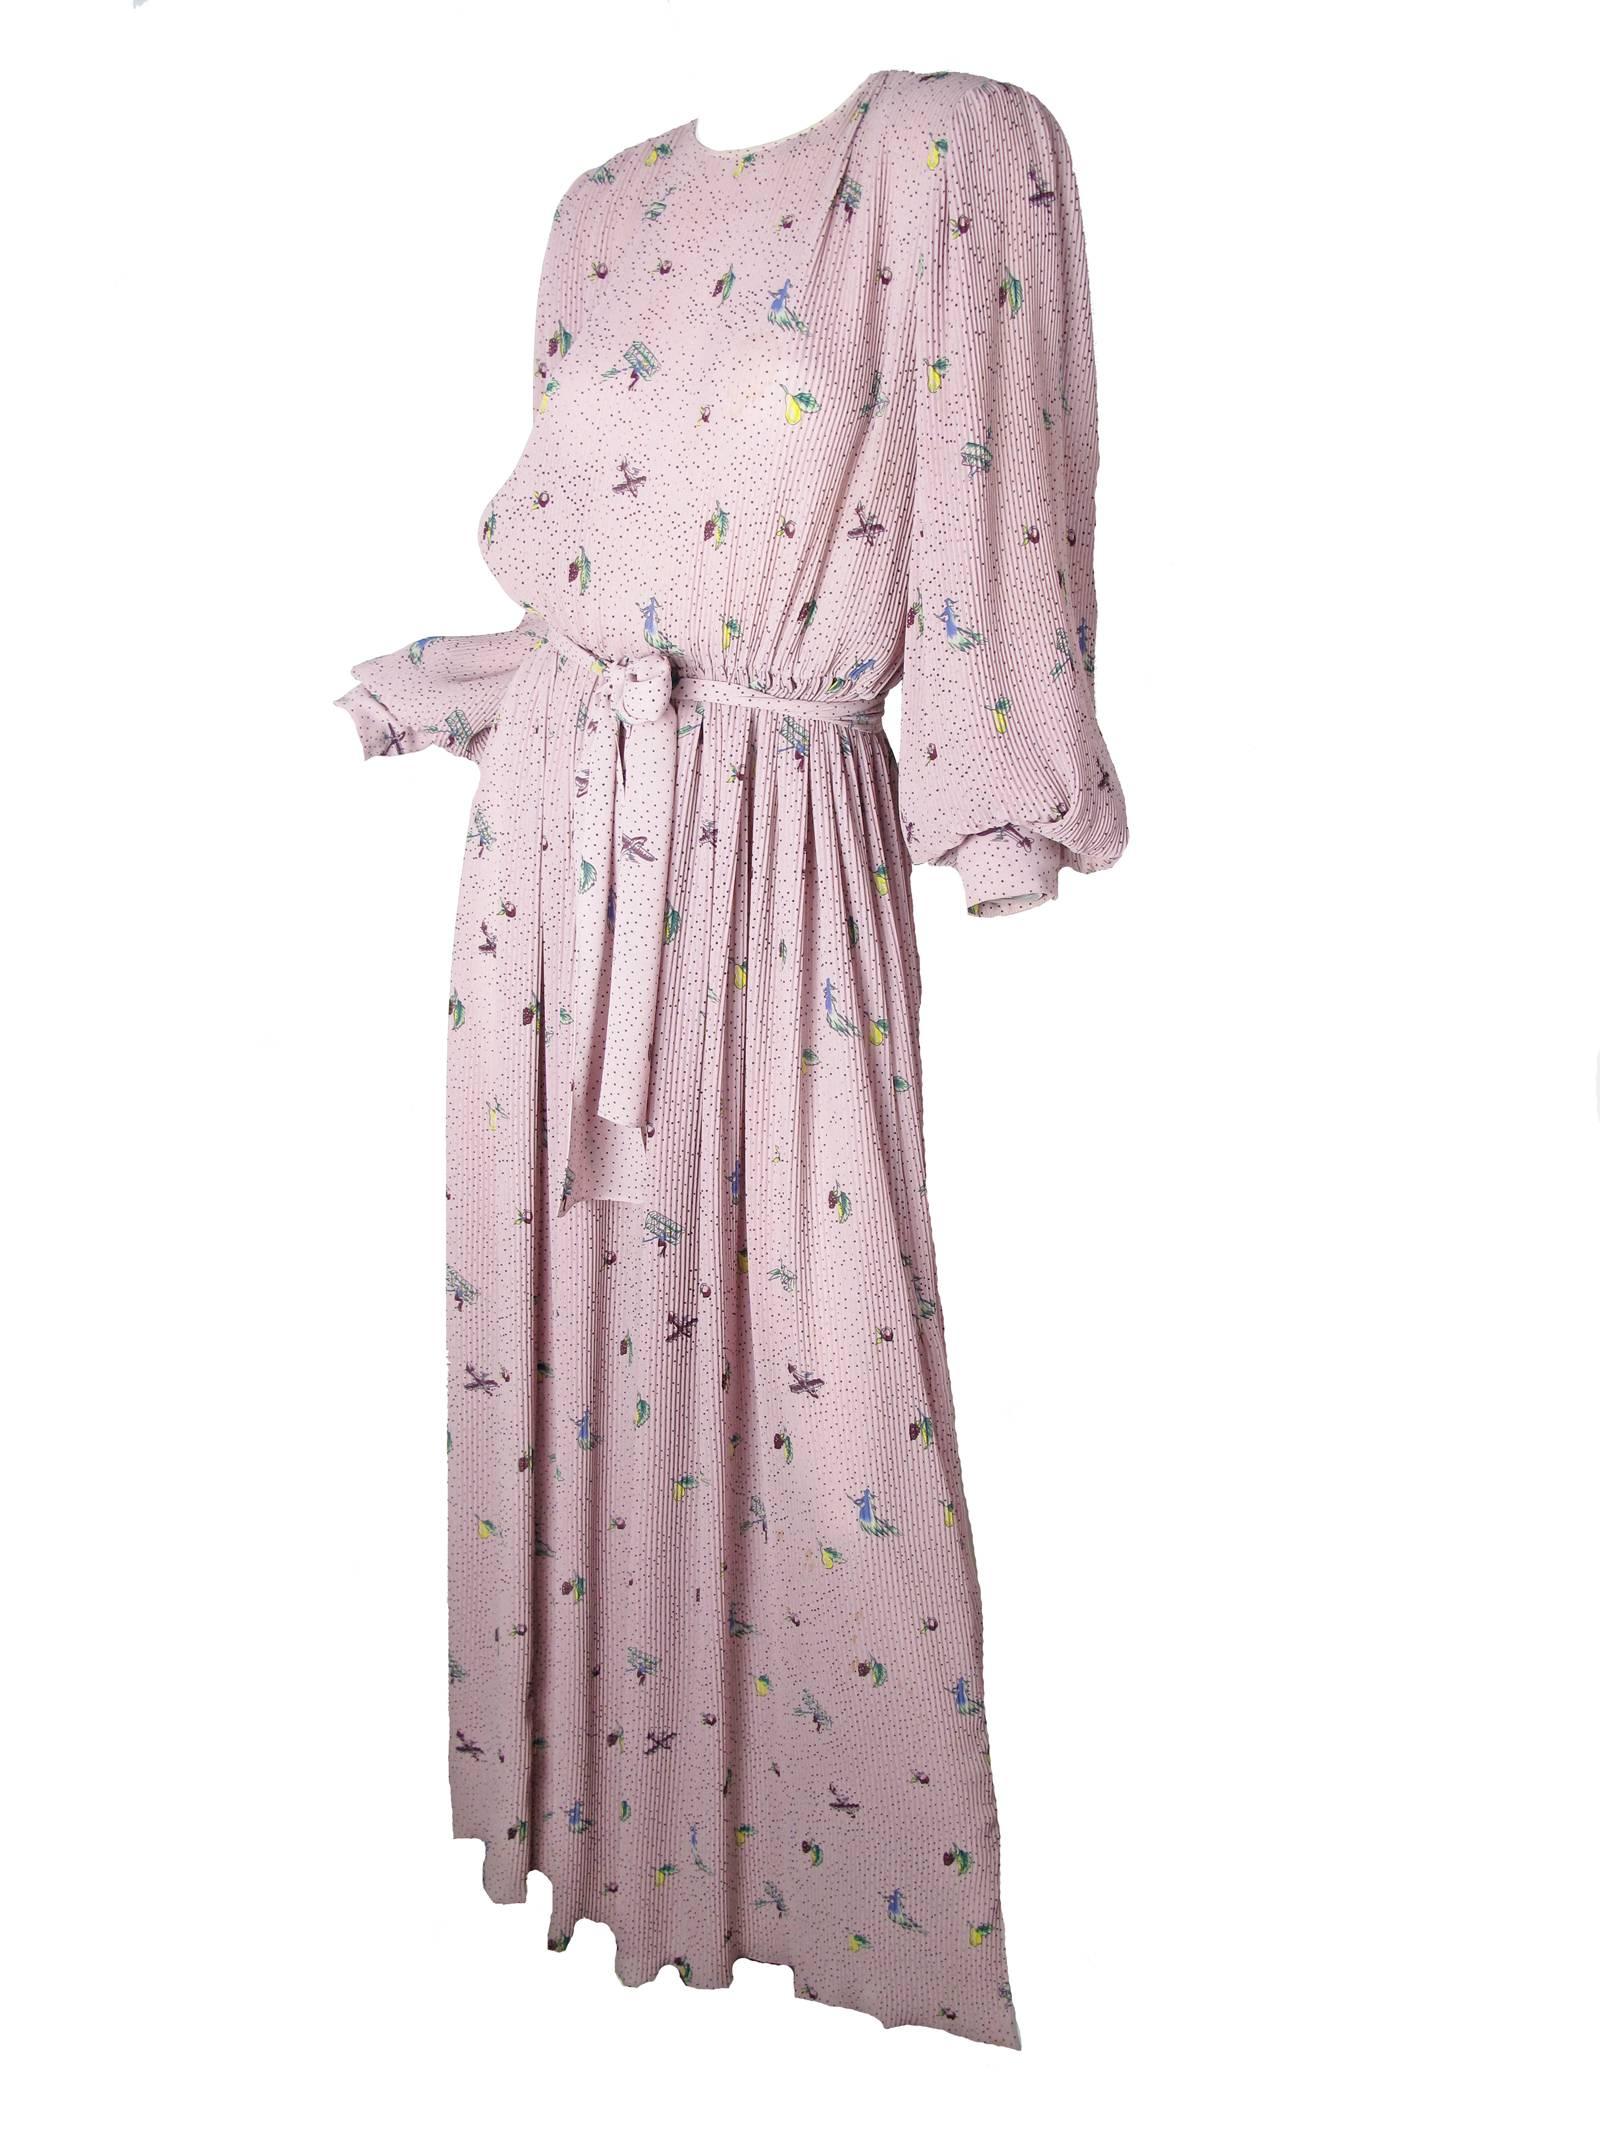 Hanae Mori dusty pink pleated gown with witch, fruit and airplane print.  Belt at waist, tie at neck, button cuffs.  Polyester fabric. Condition: Good, some faint spots on front.  Size 8 /10
42" bust, 25" elastic waist, 26 1/2"